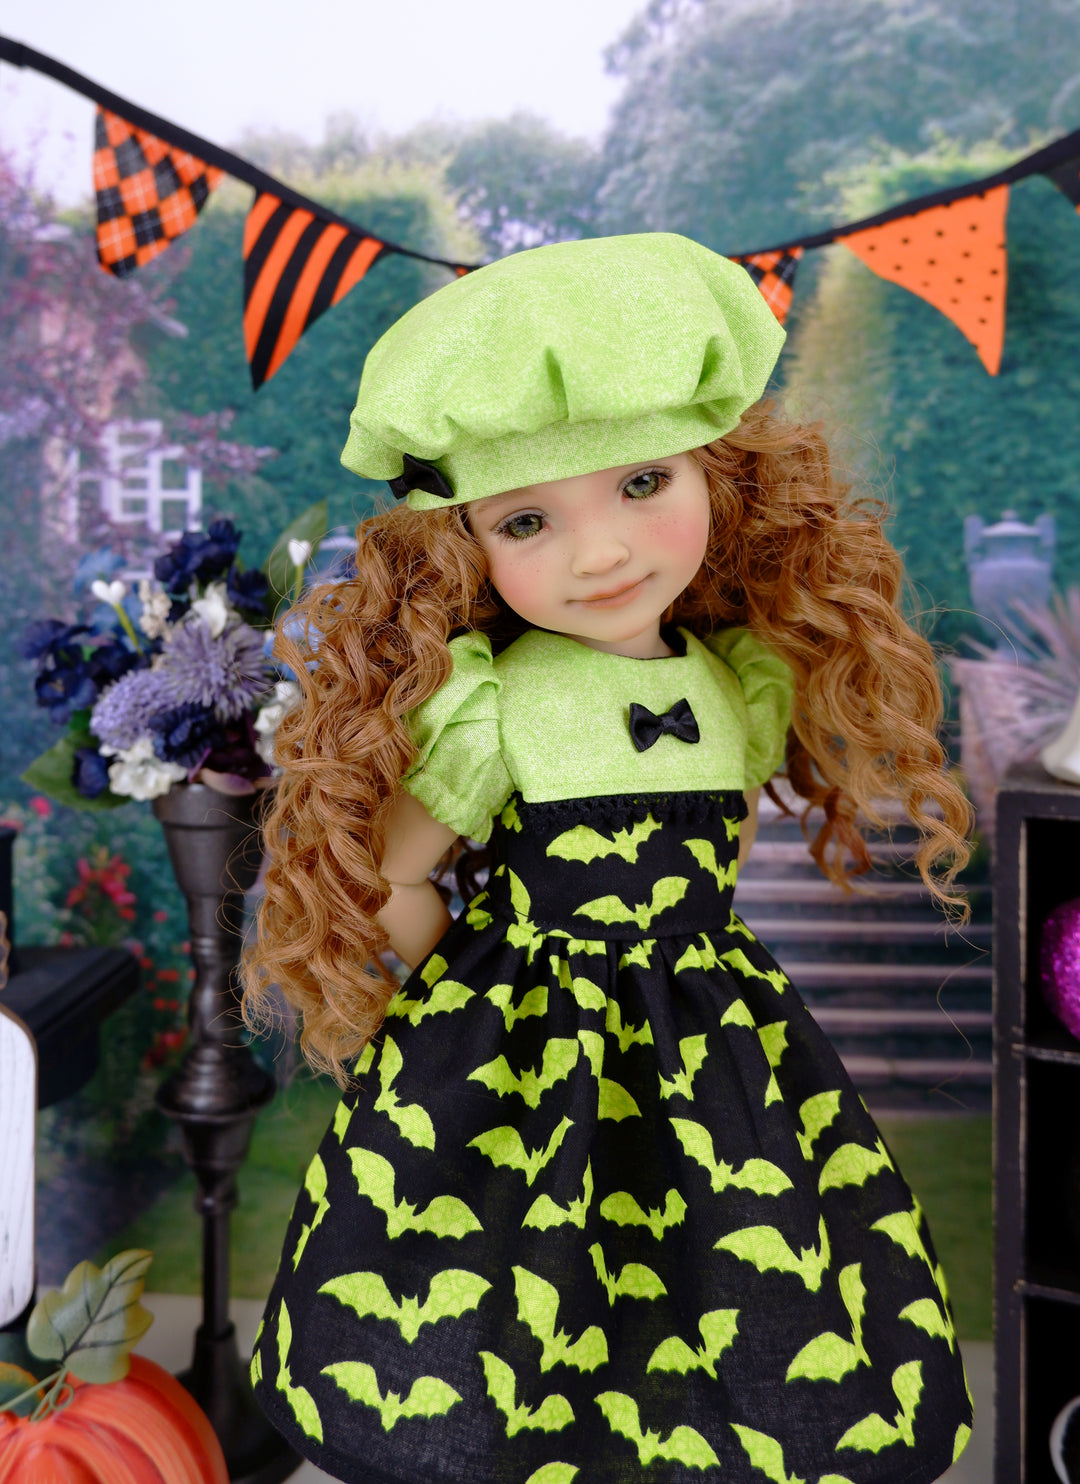 Neon Bats - dress with shoes for Ruby Red Fashion Friends doll